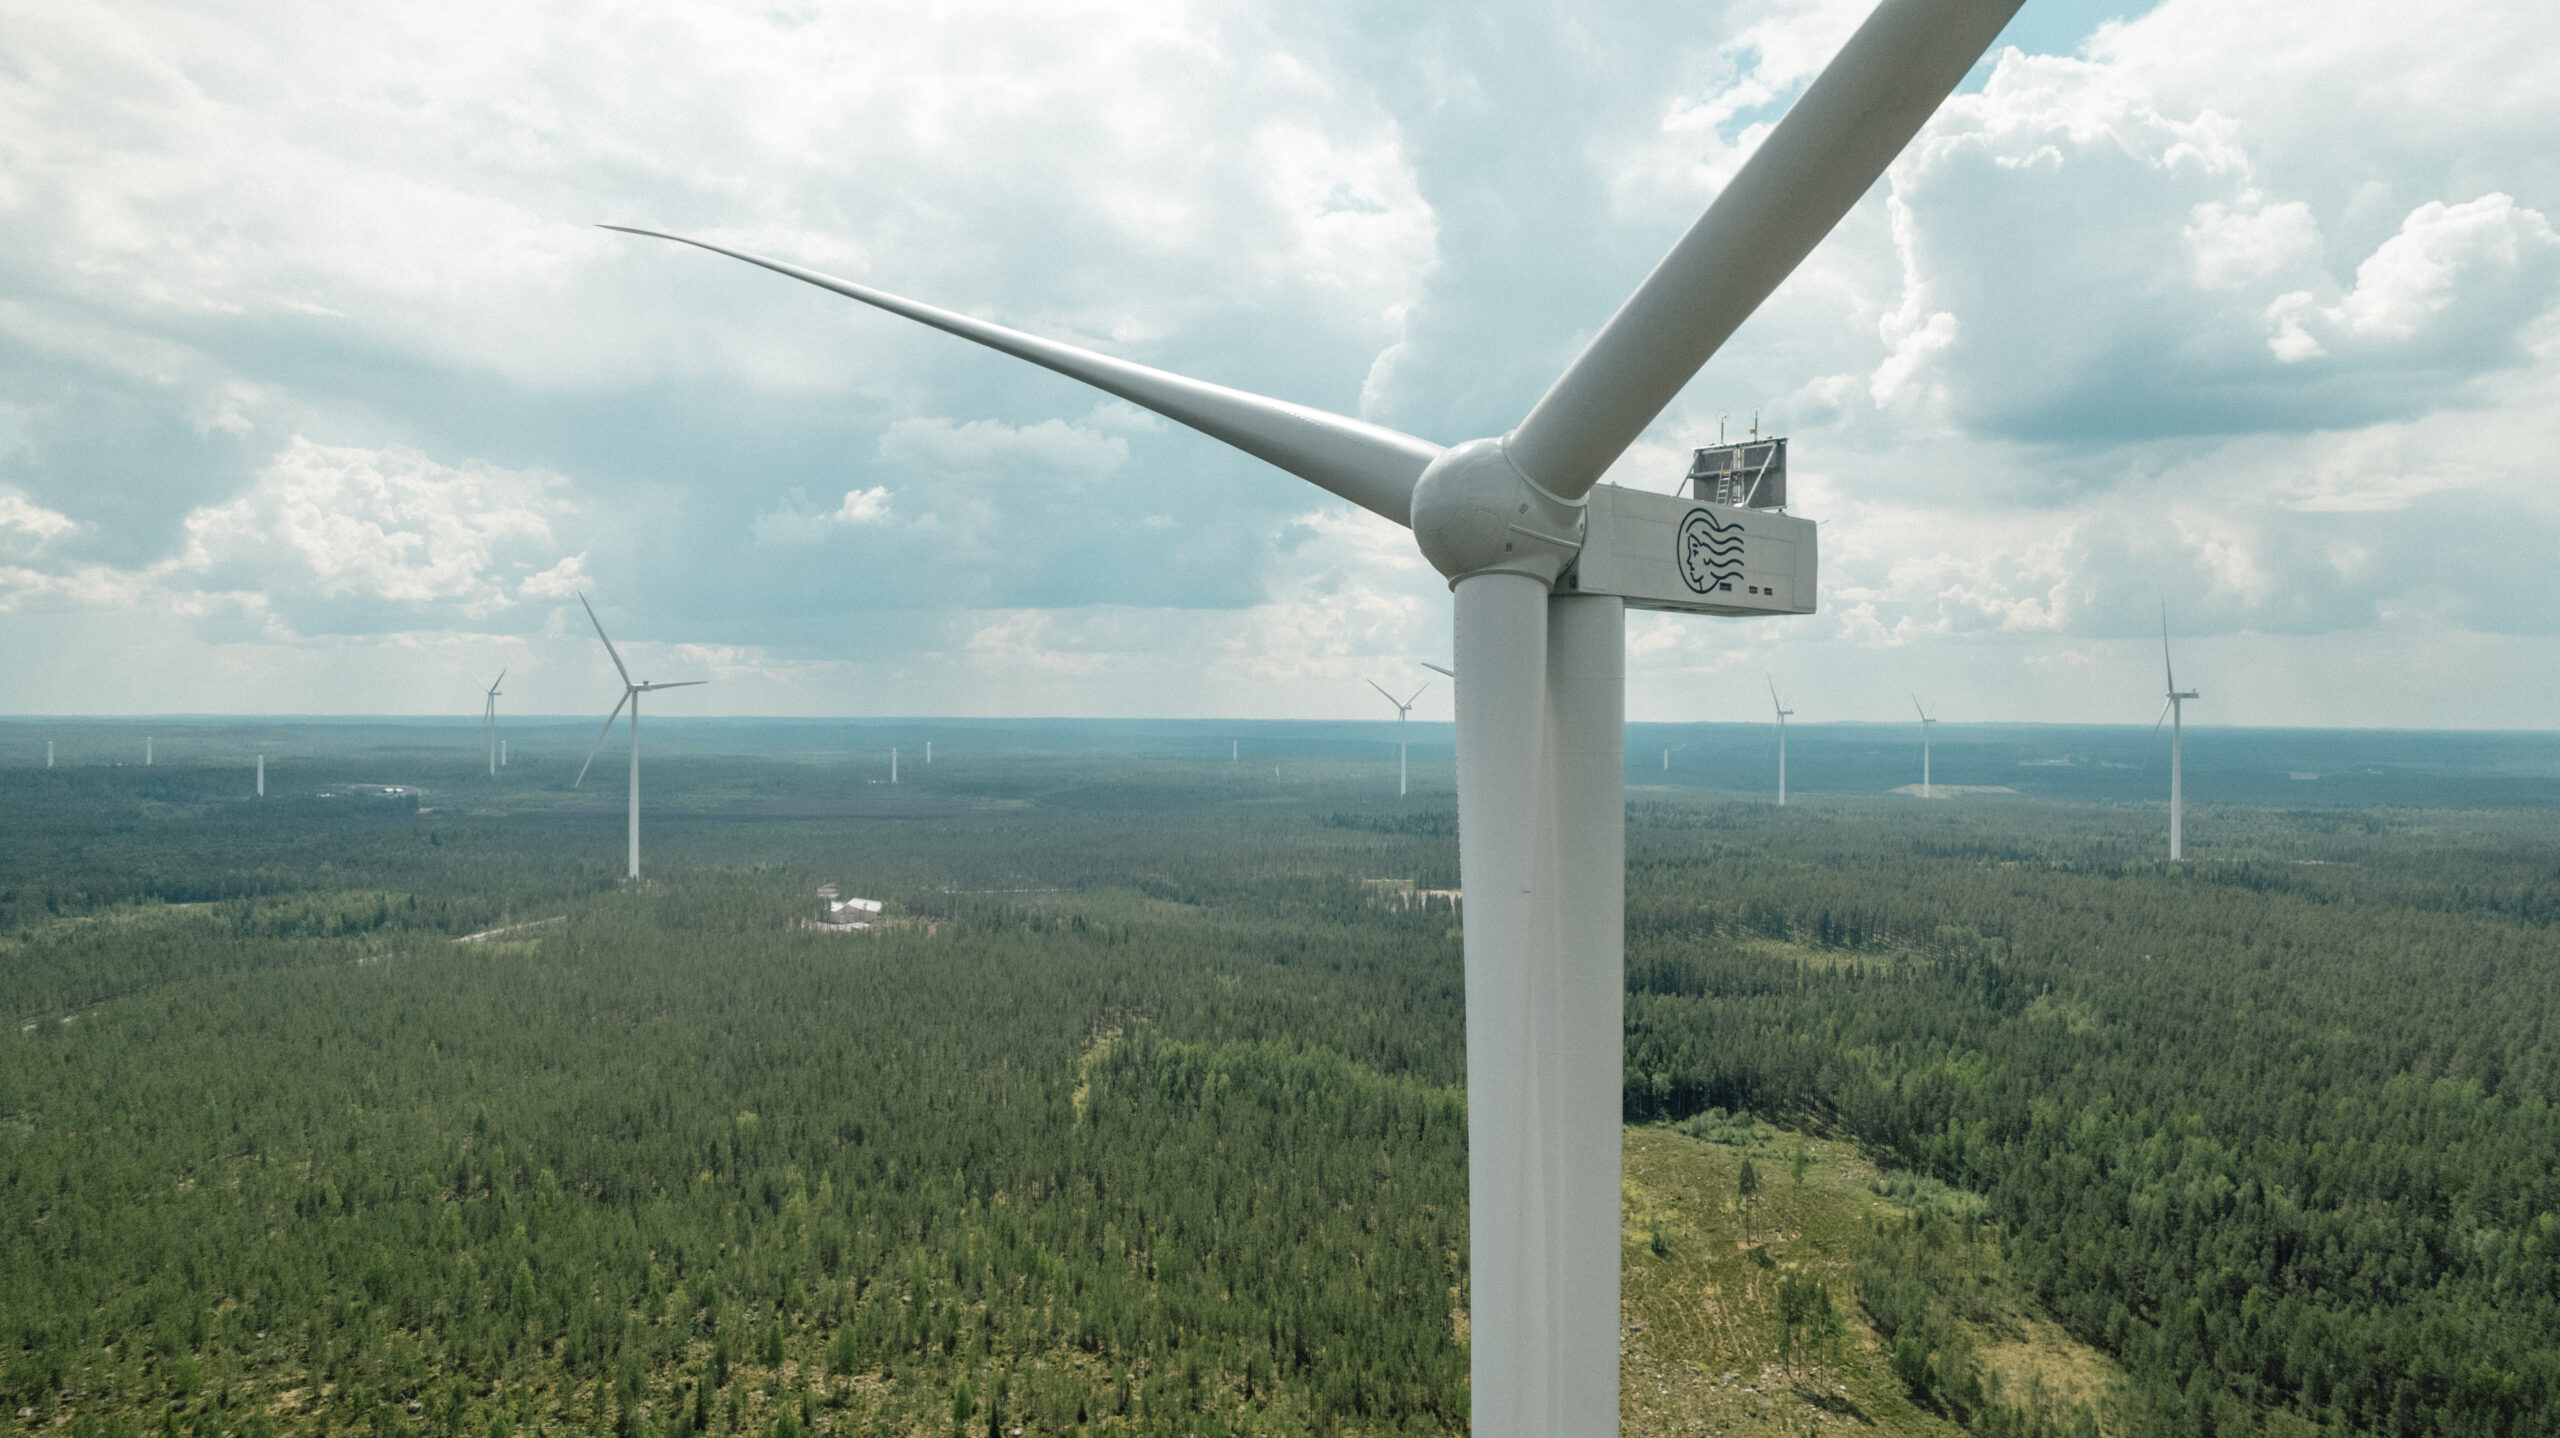 🇫🇮 Ilmatar uses an innovative TCI-contracting model to construct one of Finland’s biggest wind farms